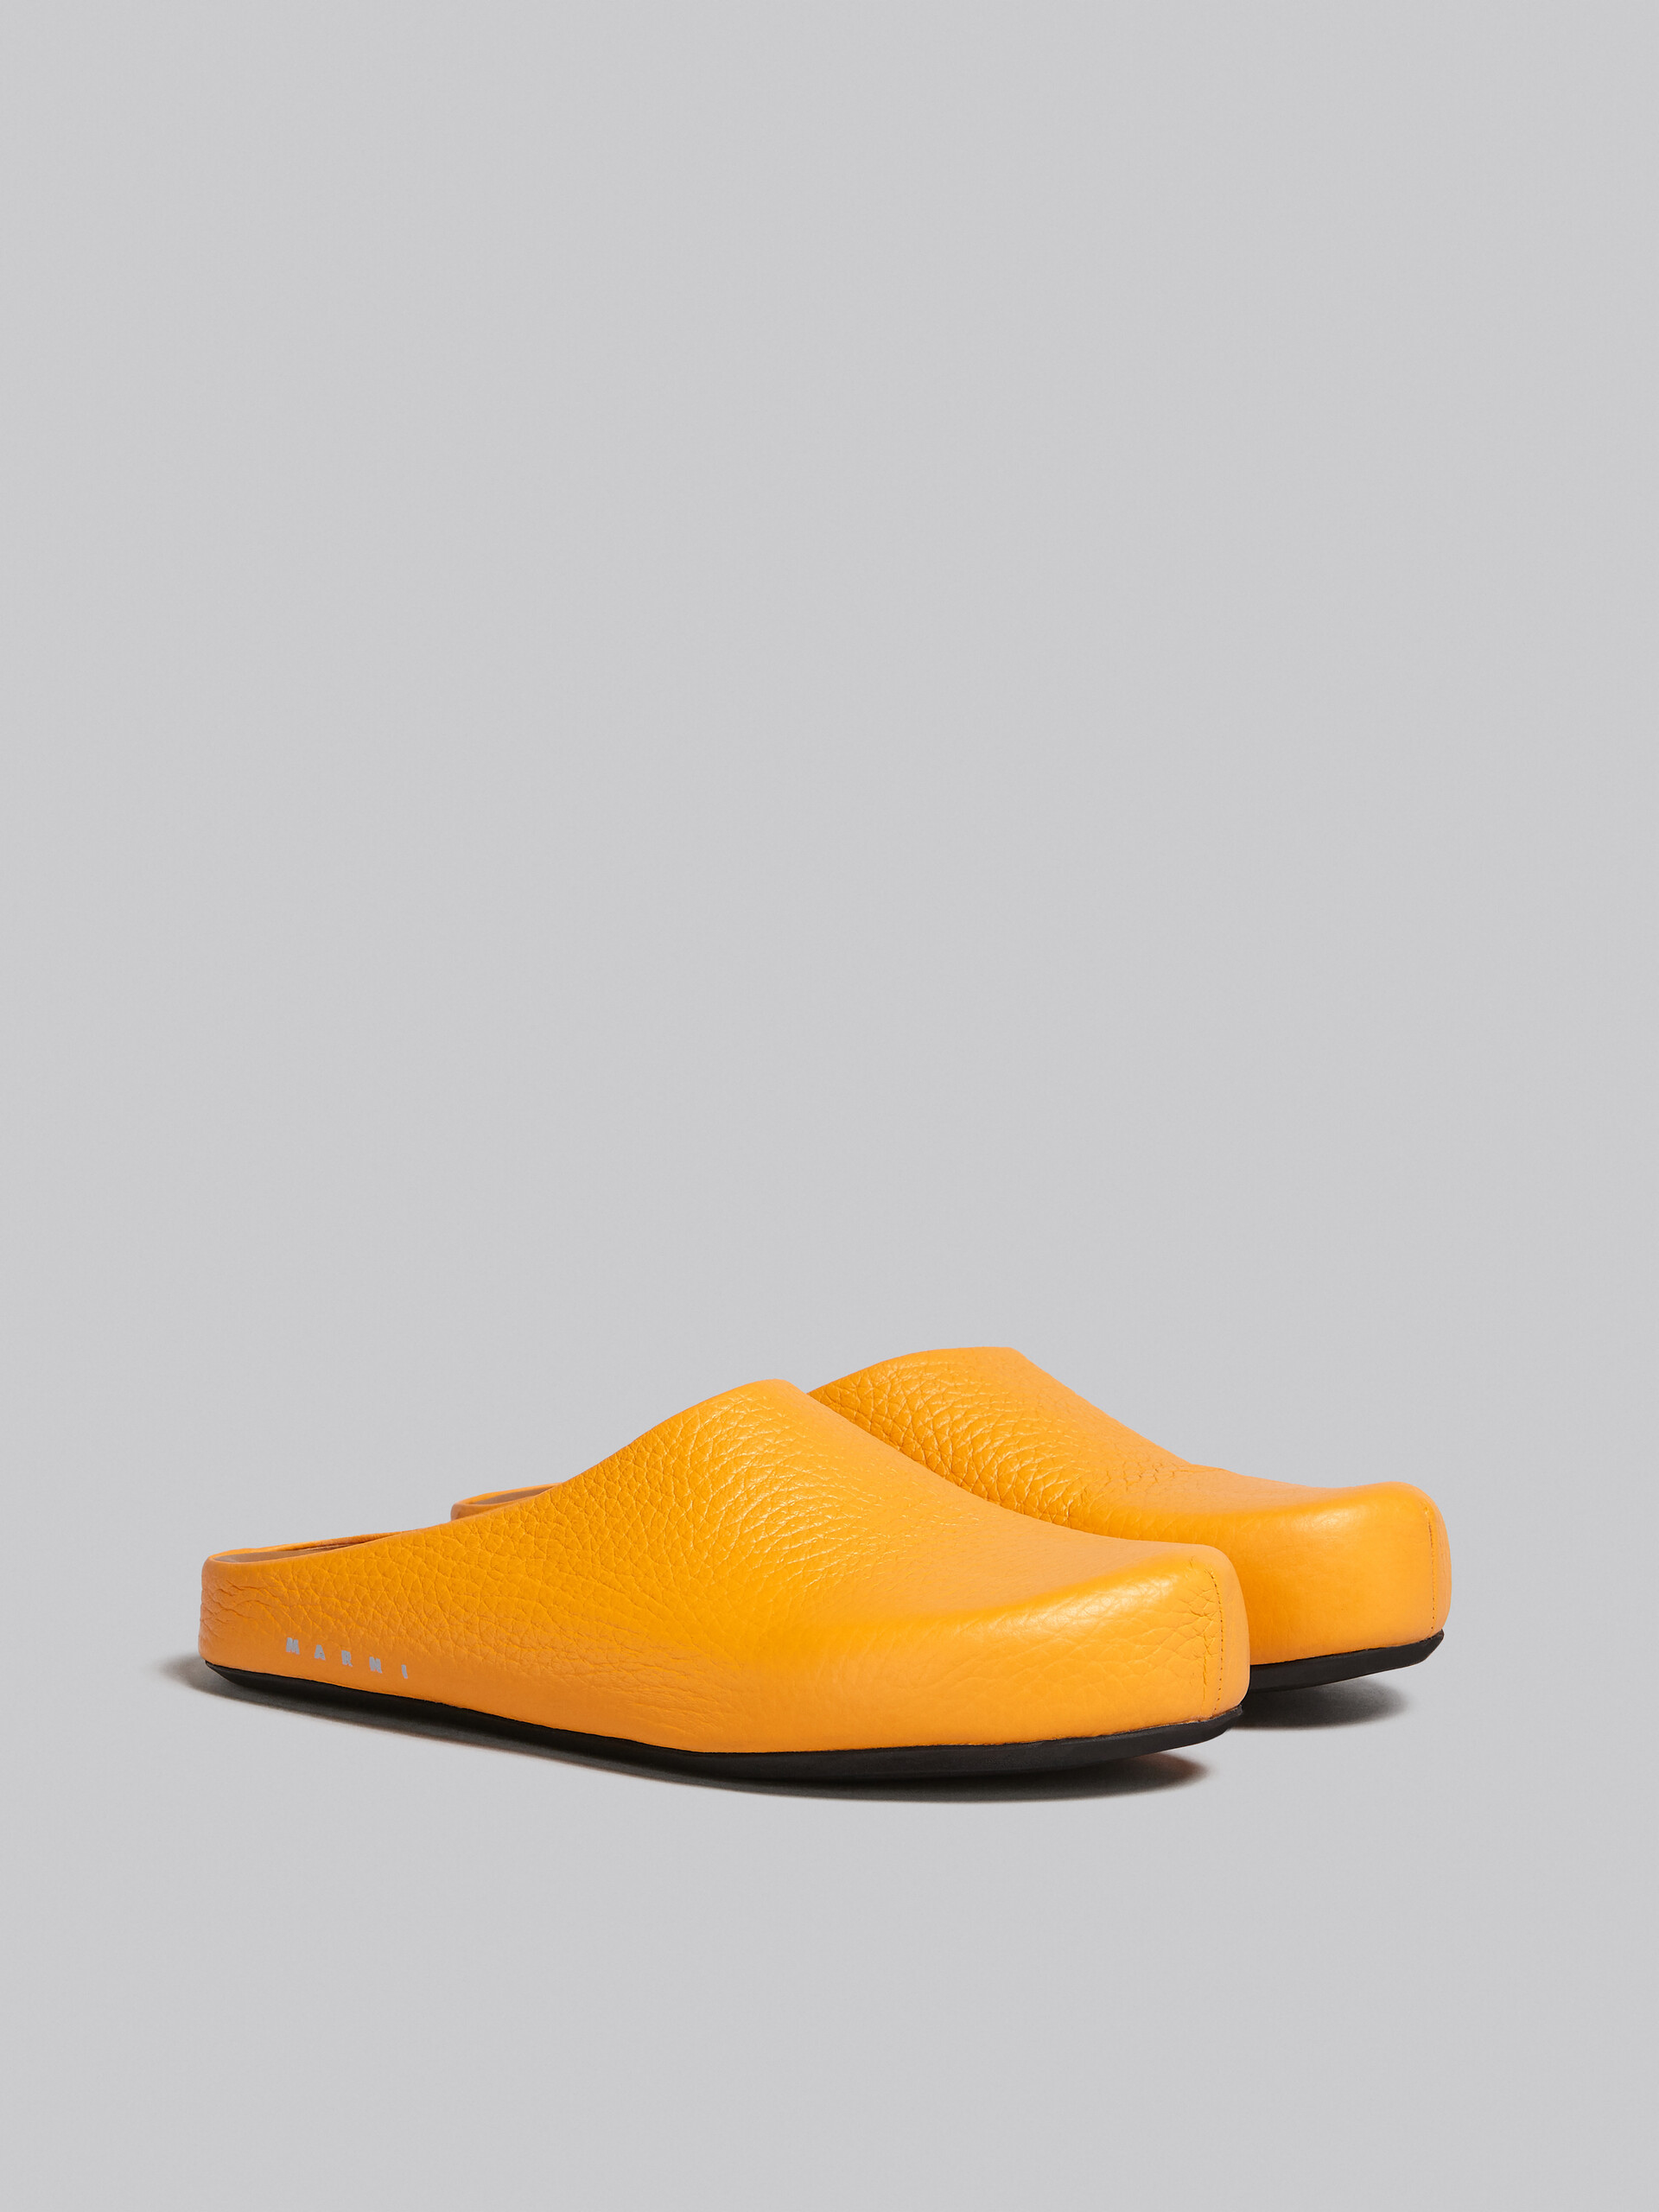 Yellow leather Fussbett sabot - Clogs - Image 2